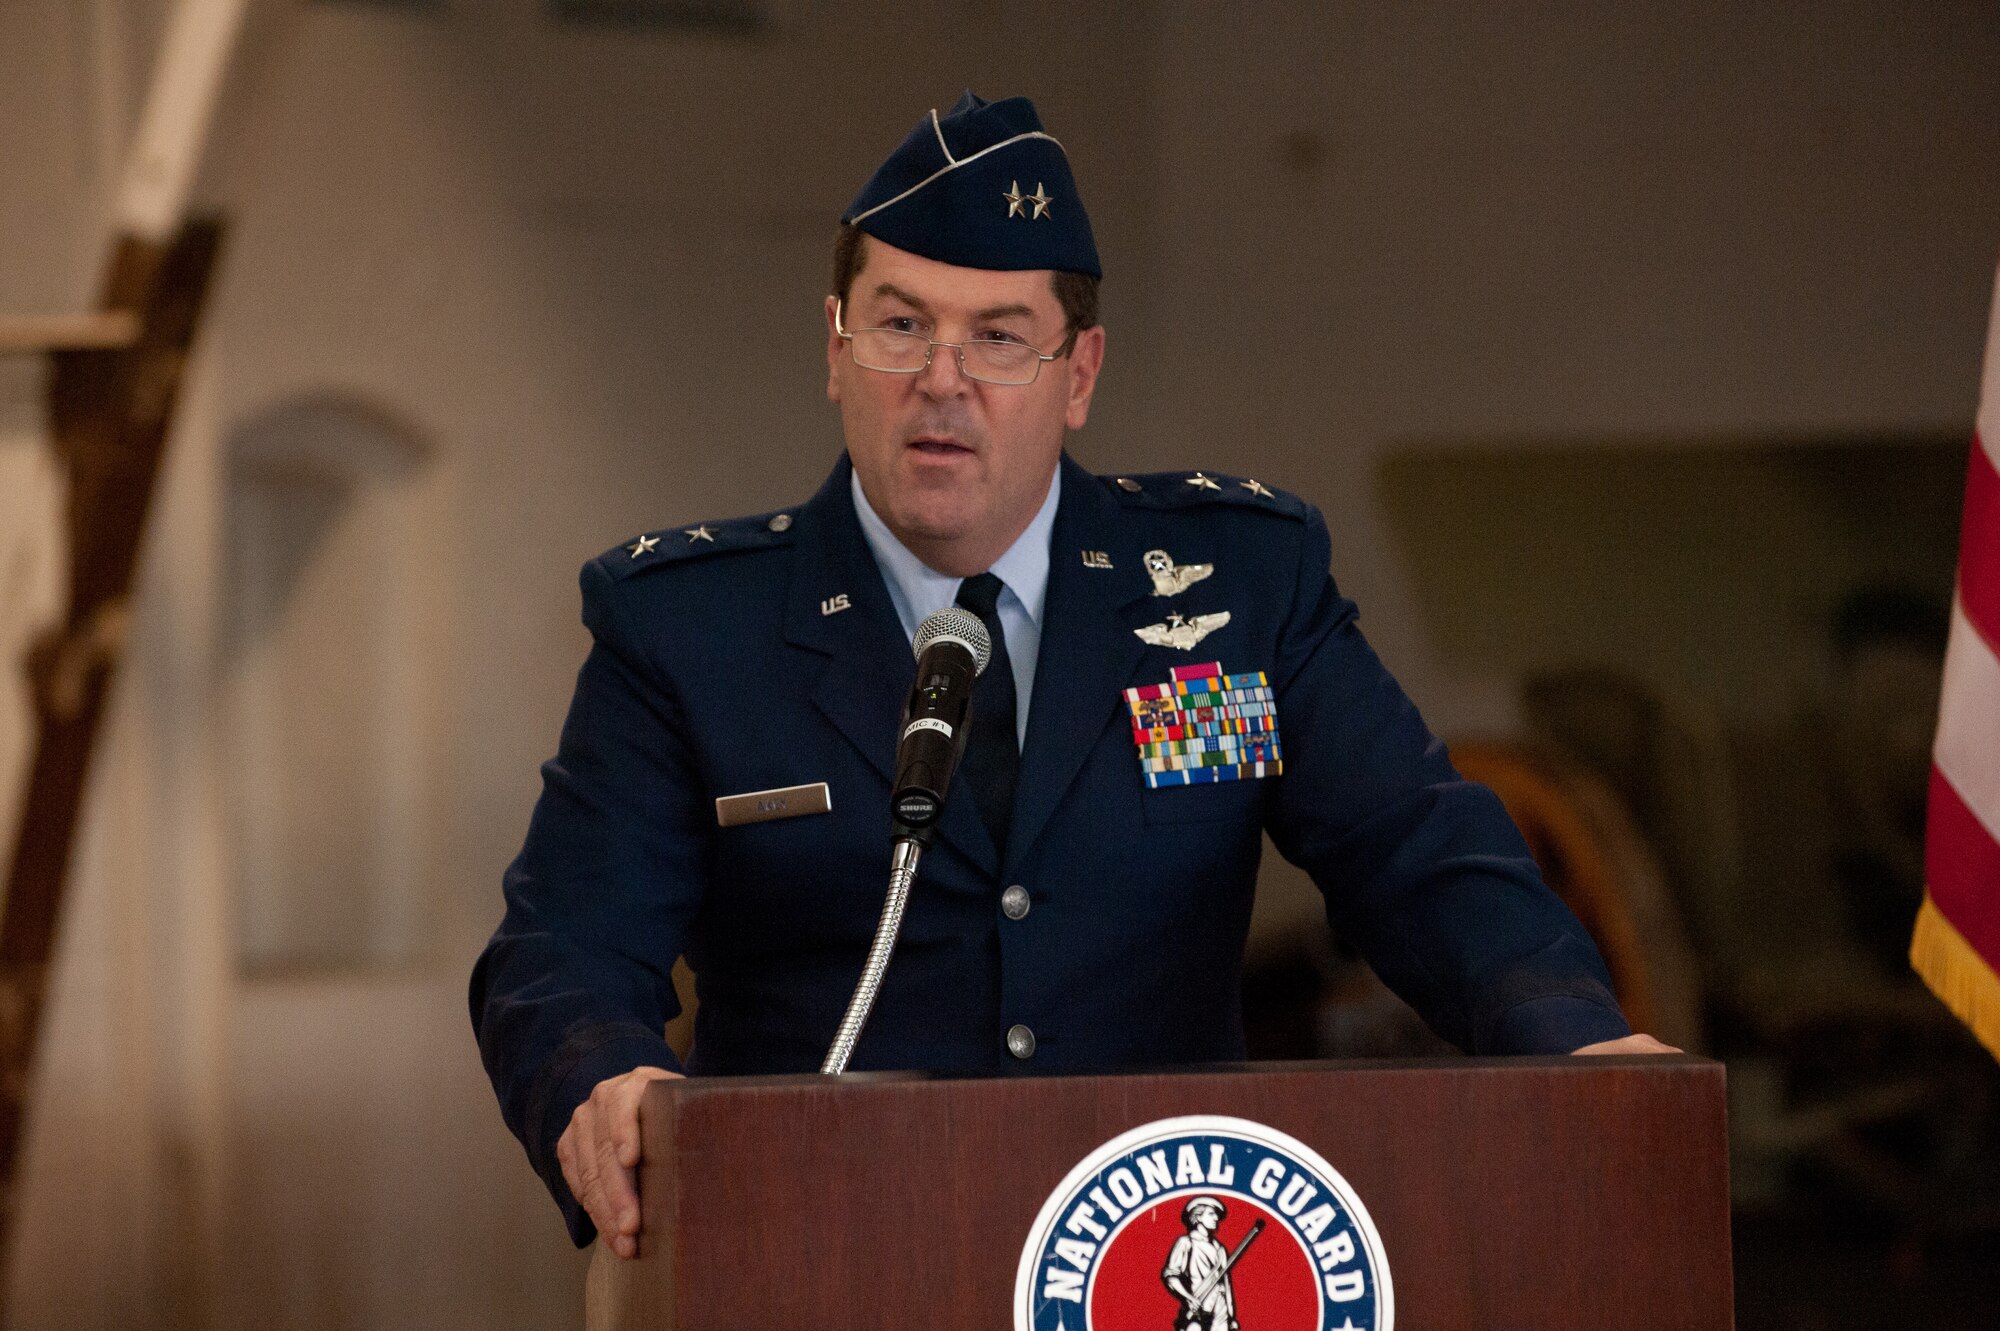 Maj. Gen. Michael D. Akey, outgoing Commander Massachusetts Air National Guard, addresses the crowd during a change of command ceremony held at the National Guard Museum in Worcester Mass. on September 12, 2010. (Photo by Technical Sergeant Erik Klein)